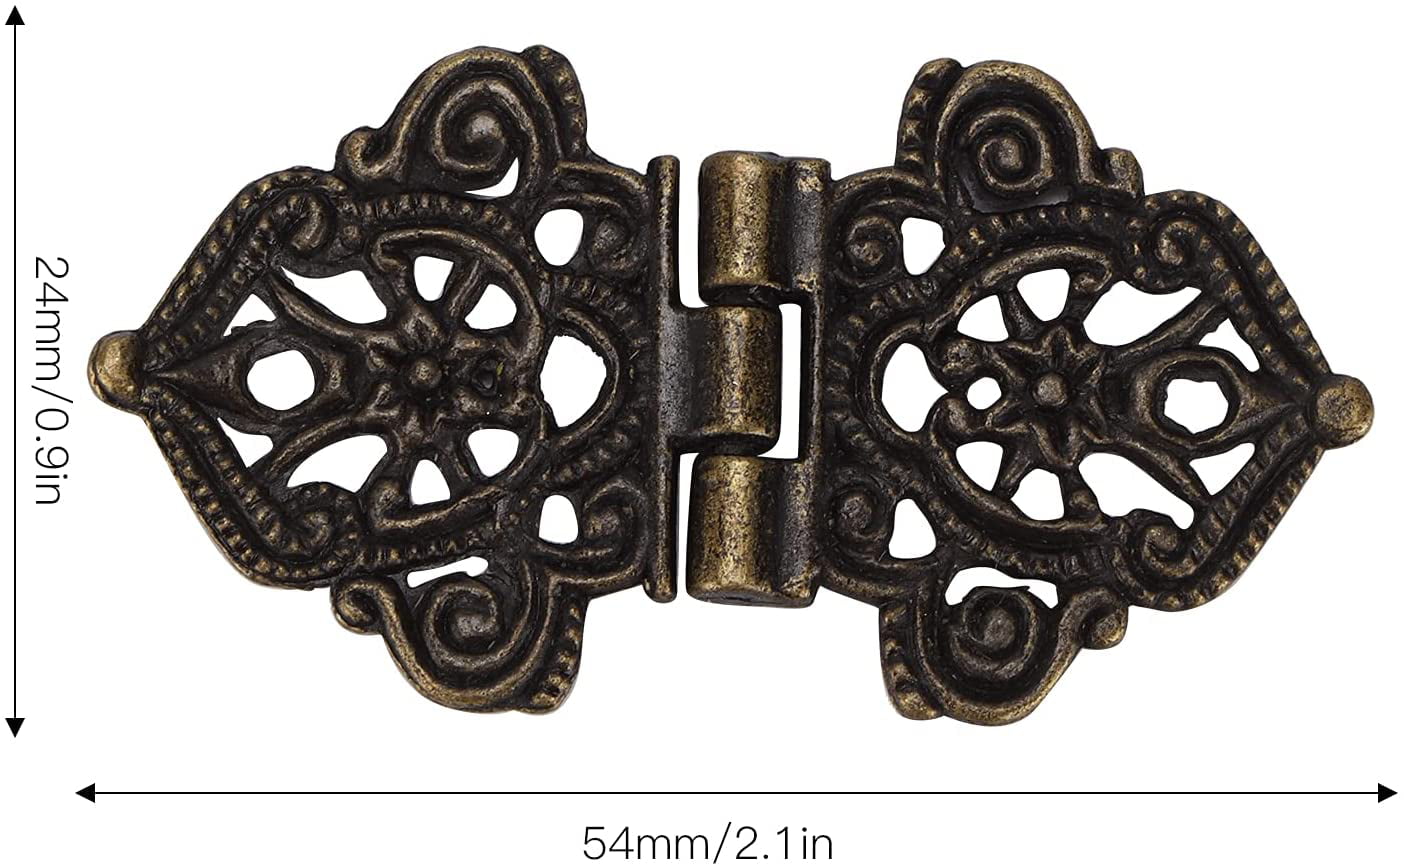 6Set Antique Jewelry Box Hinges and latches Antique Hinge Antique Hasp Screws Bronze Engraved Designs for DIY Jewelry Box